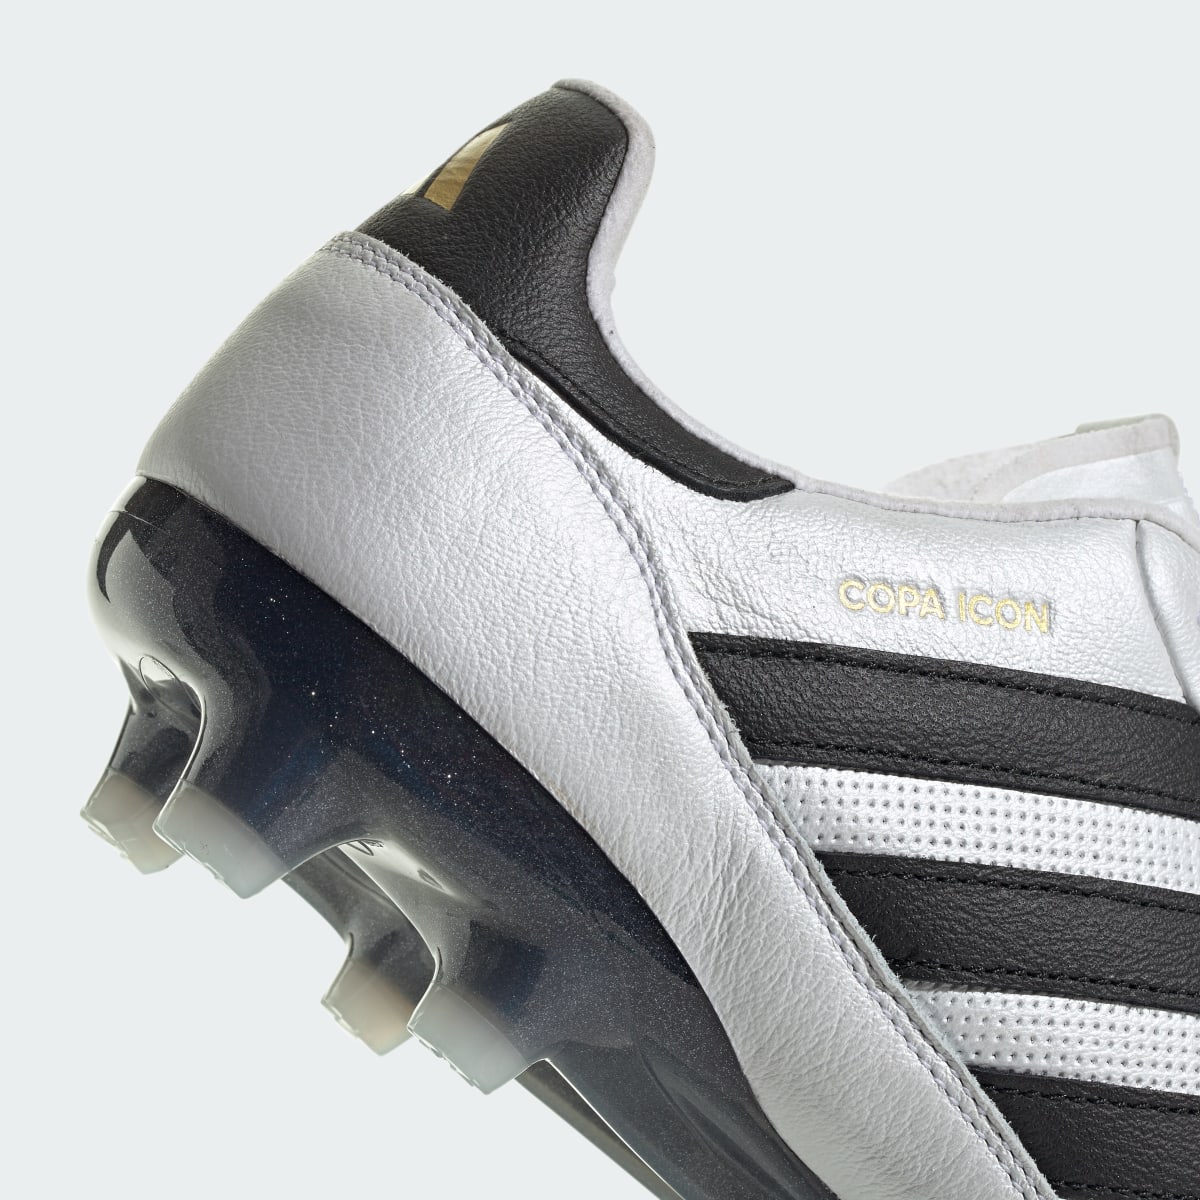 Adidas Copa Icon Firm Ground Boots. 10